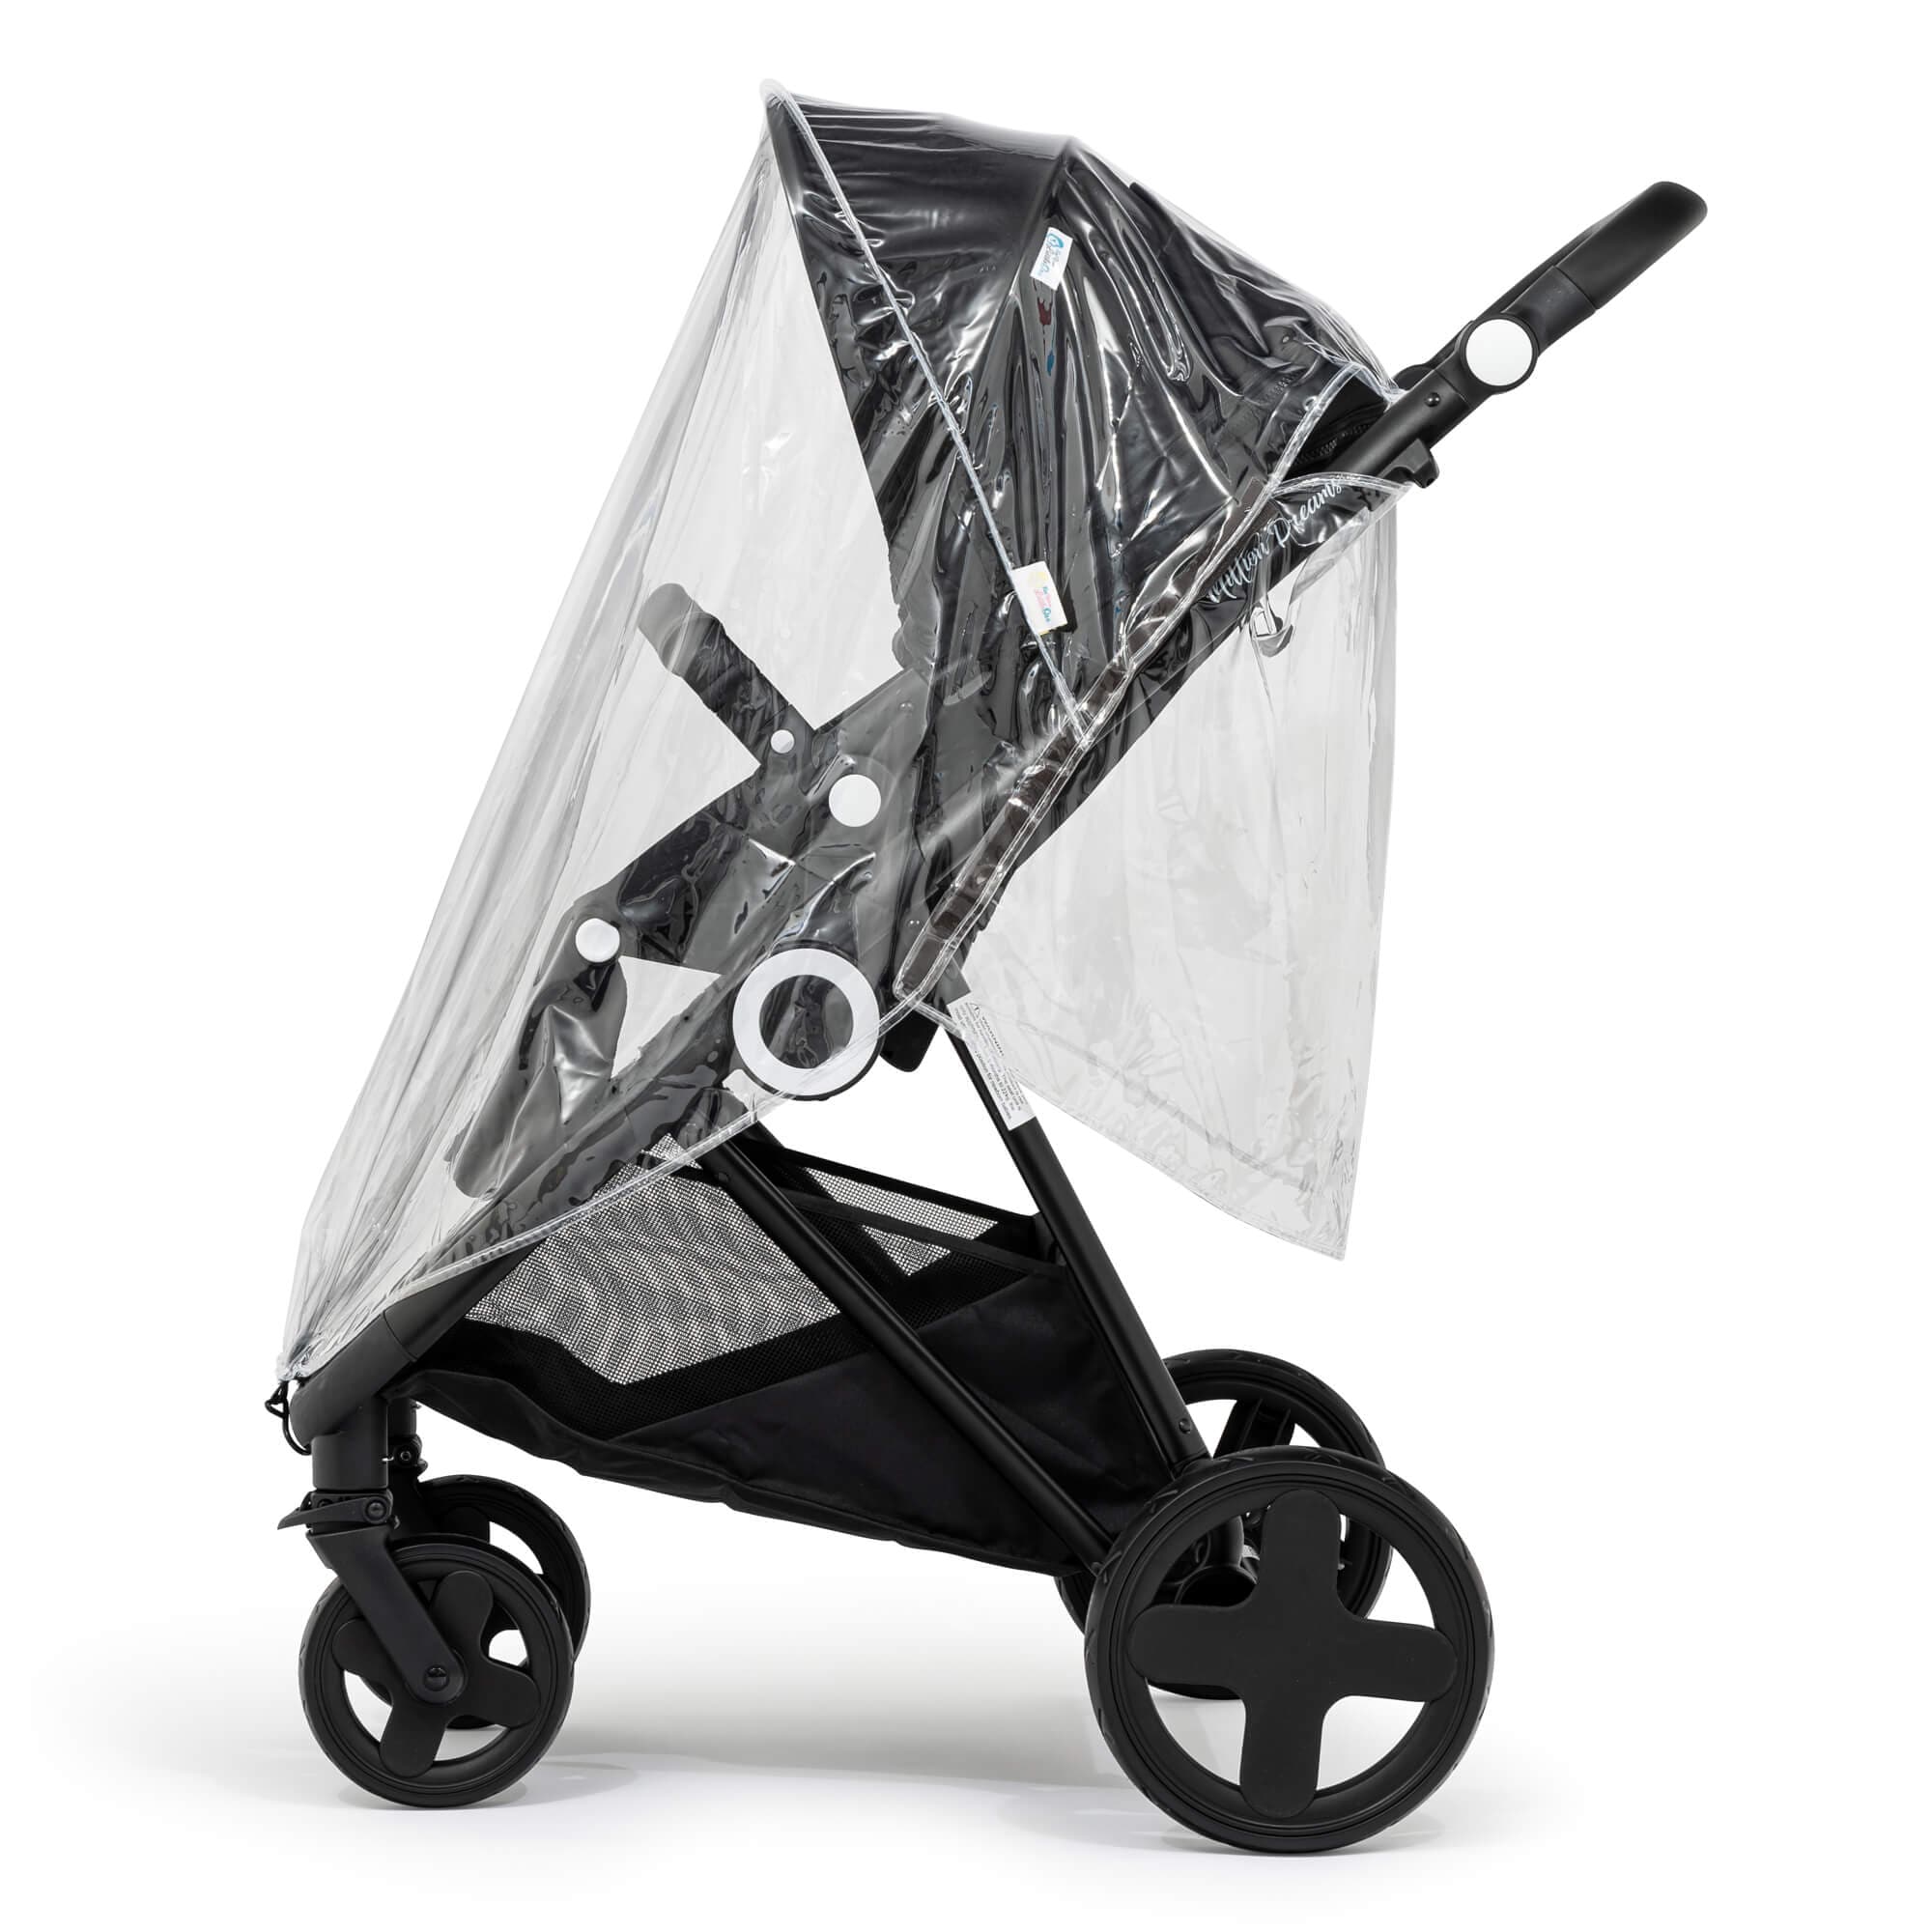 Universal Rain Cover For Pushchairs Strollers Buggys Prams -  | For Your Little One